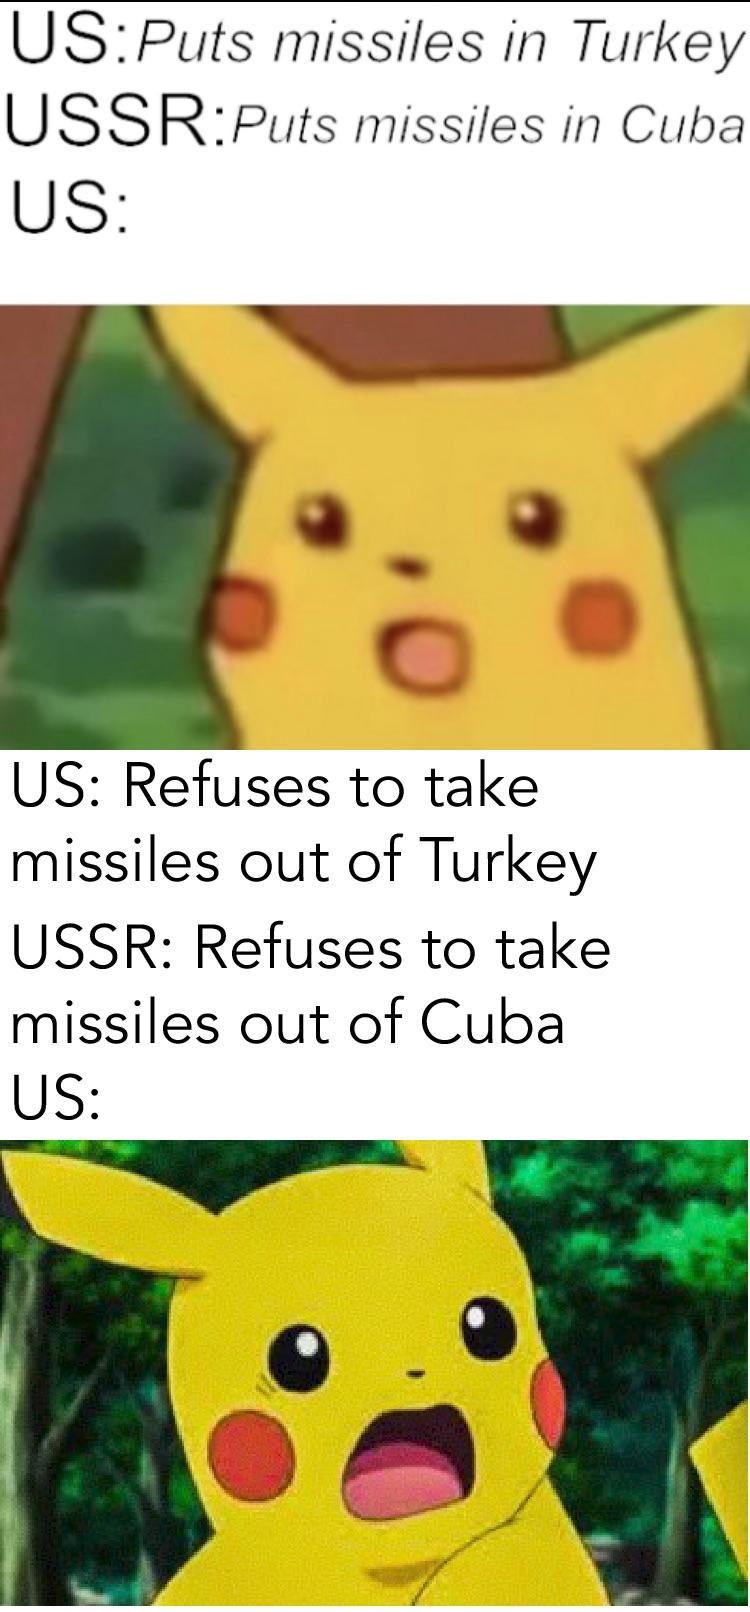 pikachu meme birthday - UsPuts missiles in Turkey UssrPuts missiles in Cuba Us Us Refuses to take missiles out of Turkey Ussr Refuses to take missiles out of Cuba Us